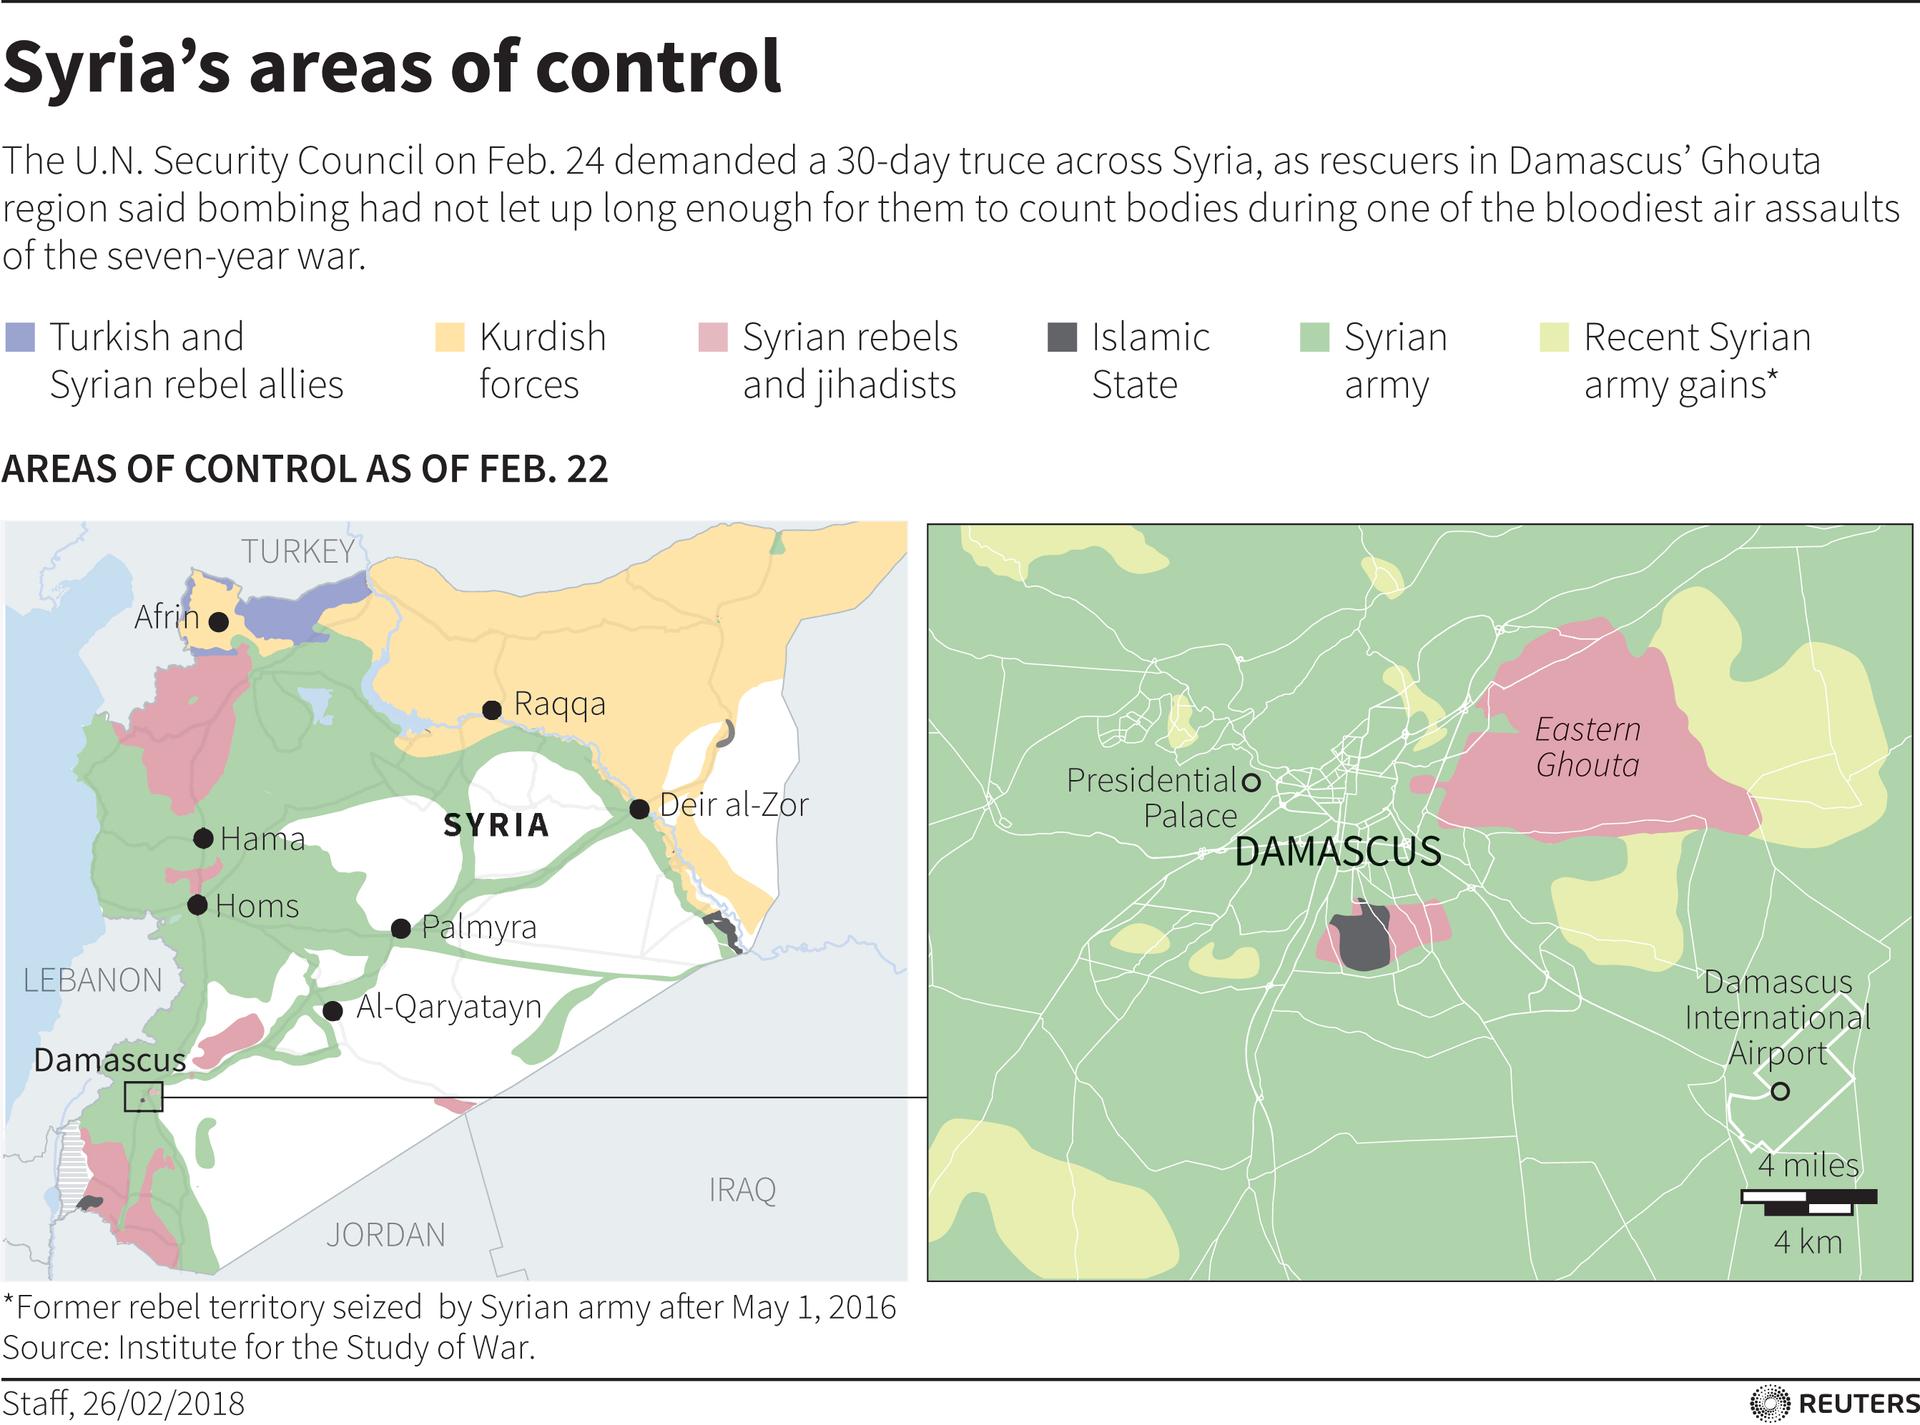 Maps showing Ghouta in Syria and areas of control.